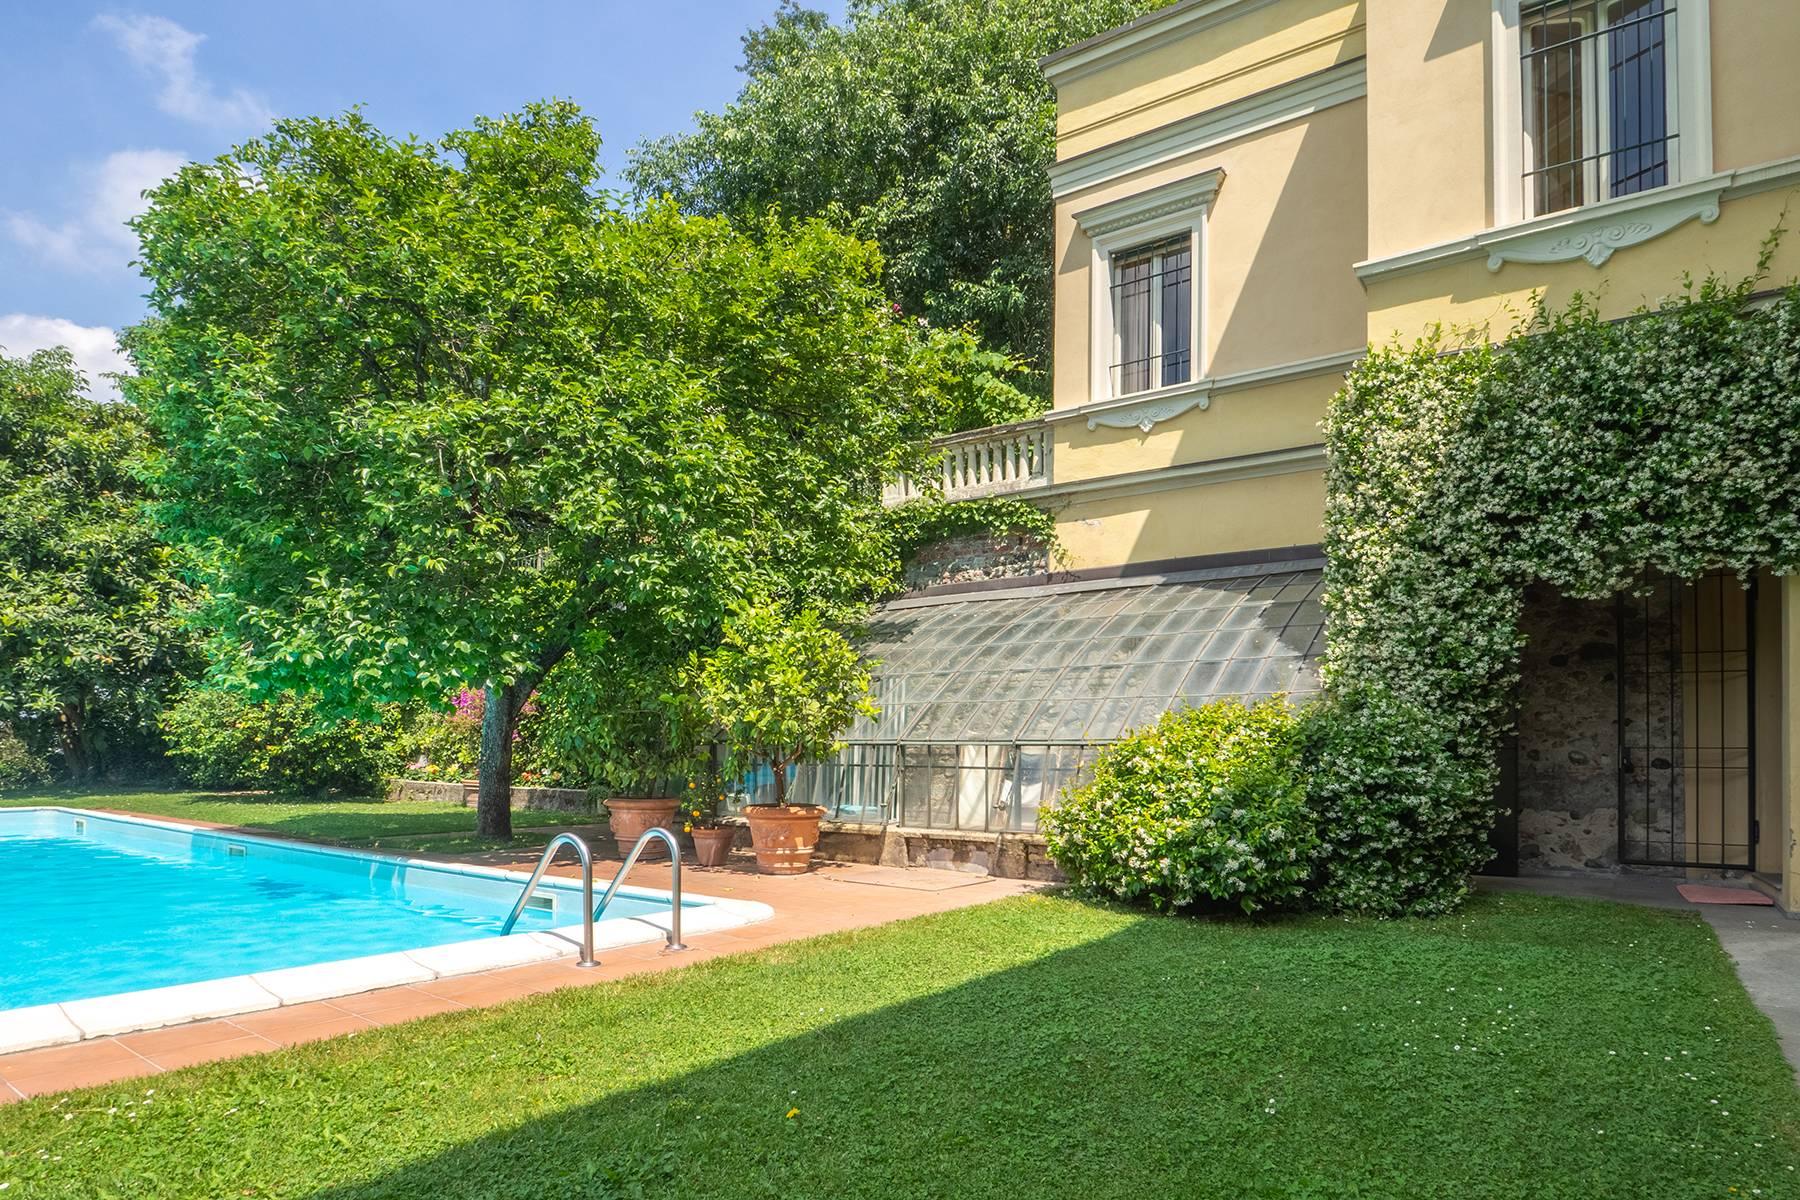 Exquisite villa with swimming pool in the hill of Turin - 20